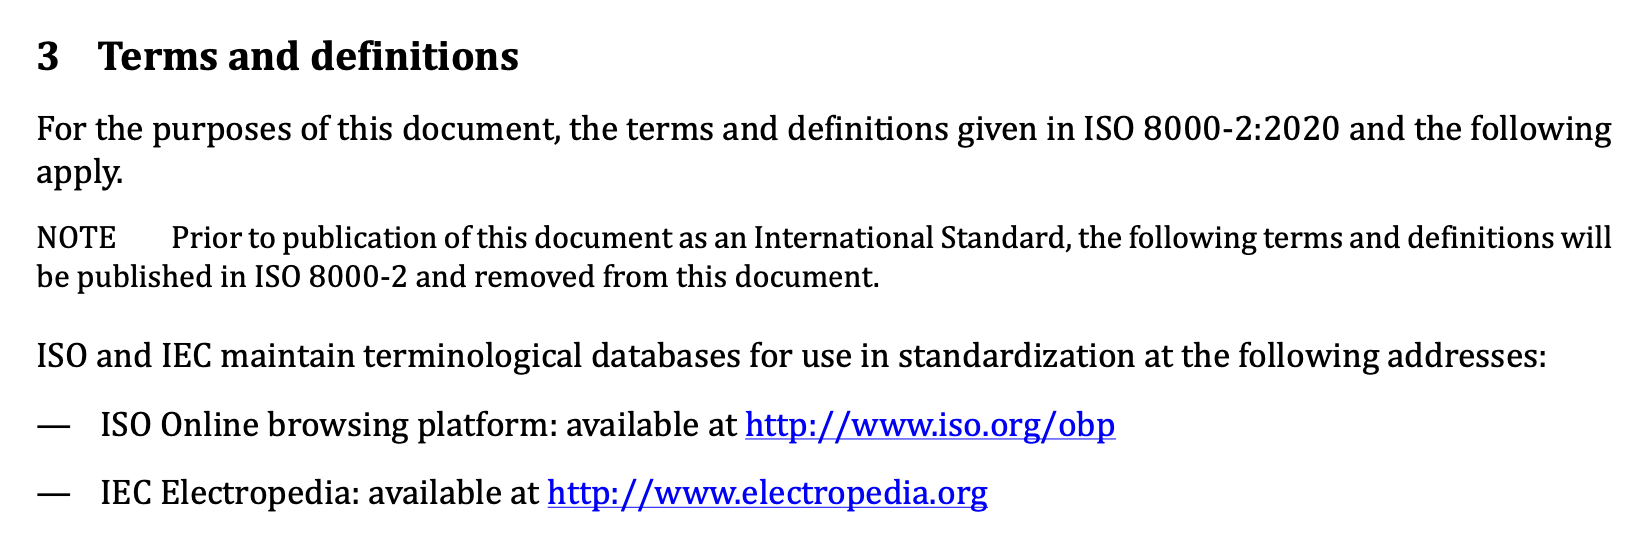 ISO 8000-114 CD draft with WG 13 required NOTE at Clause 3